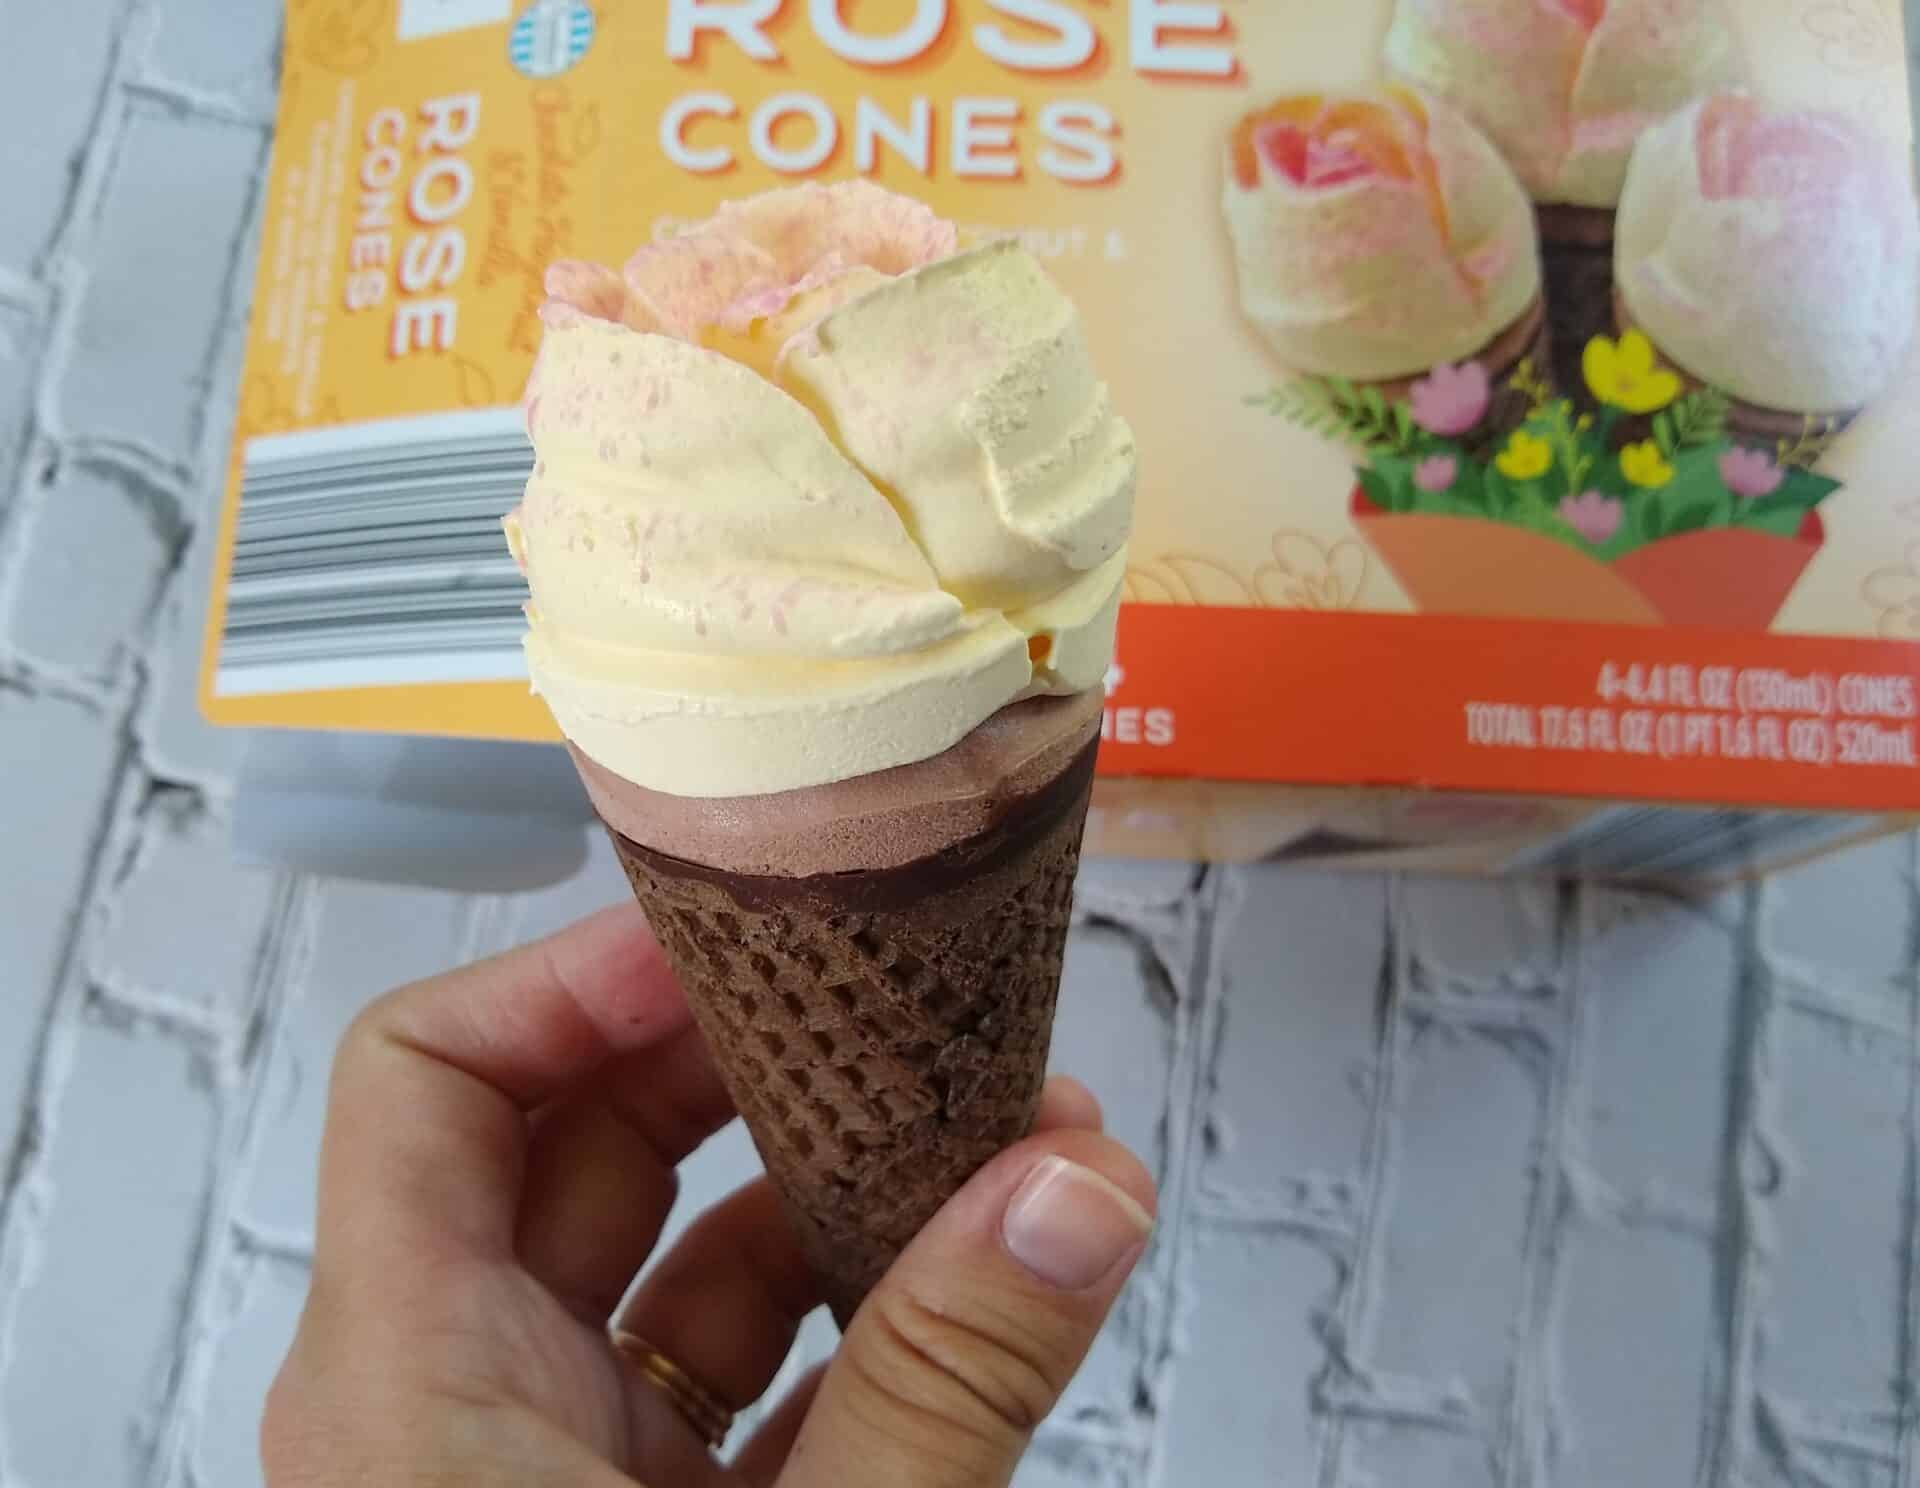 Aldi Is Selling Rose-Shaped Ice Cream Cones Starting Next Week